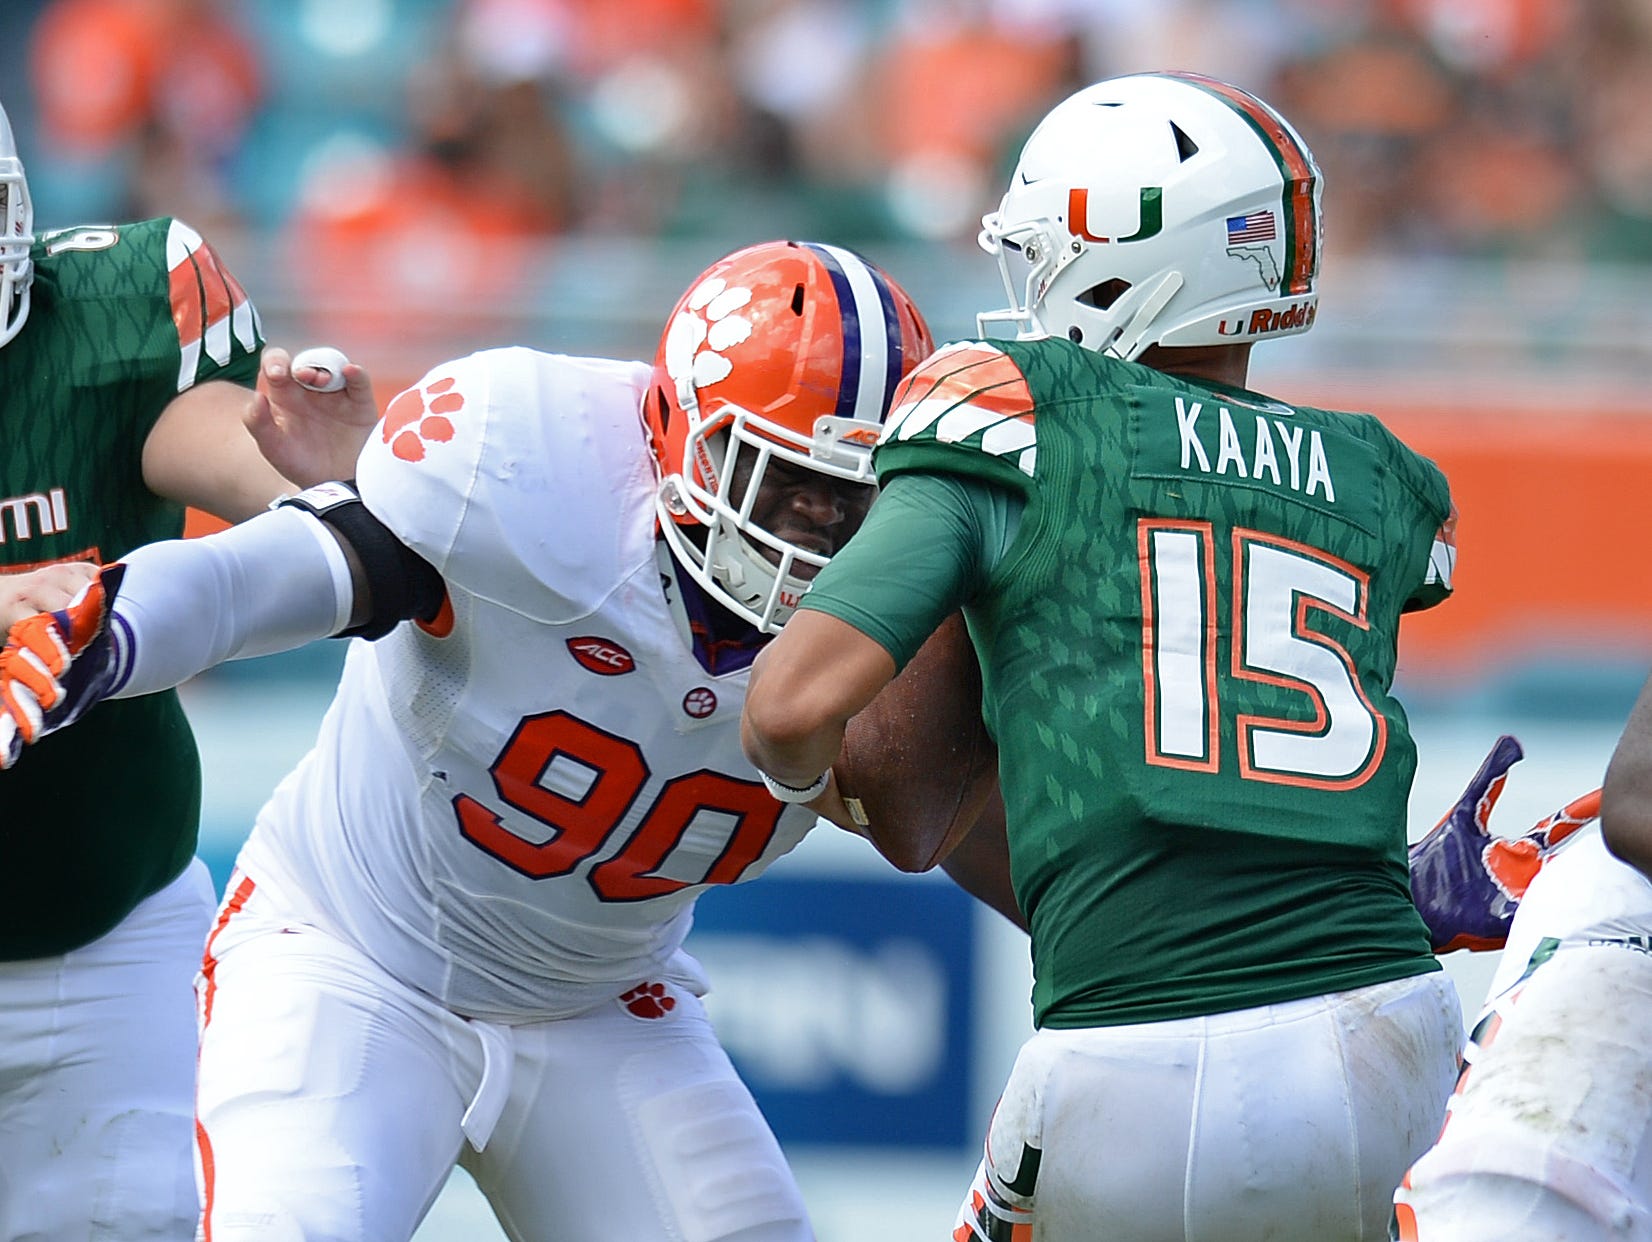 Clemson defensive end Shaq Lawson (90) bears down on Miami quarterback Brad Kaaya (15) to sack him during the 2nd quarter Saturday, Oct. 24, 2015, in Miami Gardens, Fla. The hit knocked Kaava out of the game.